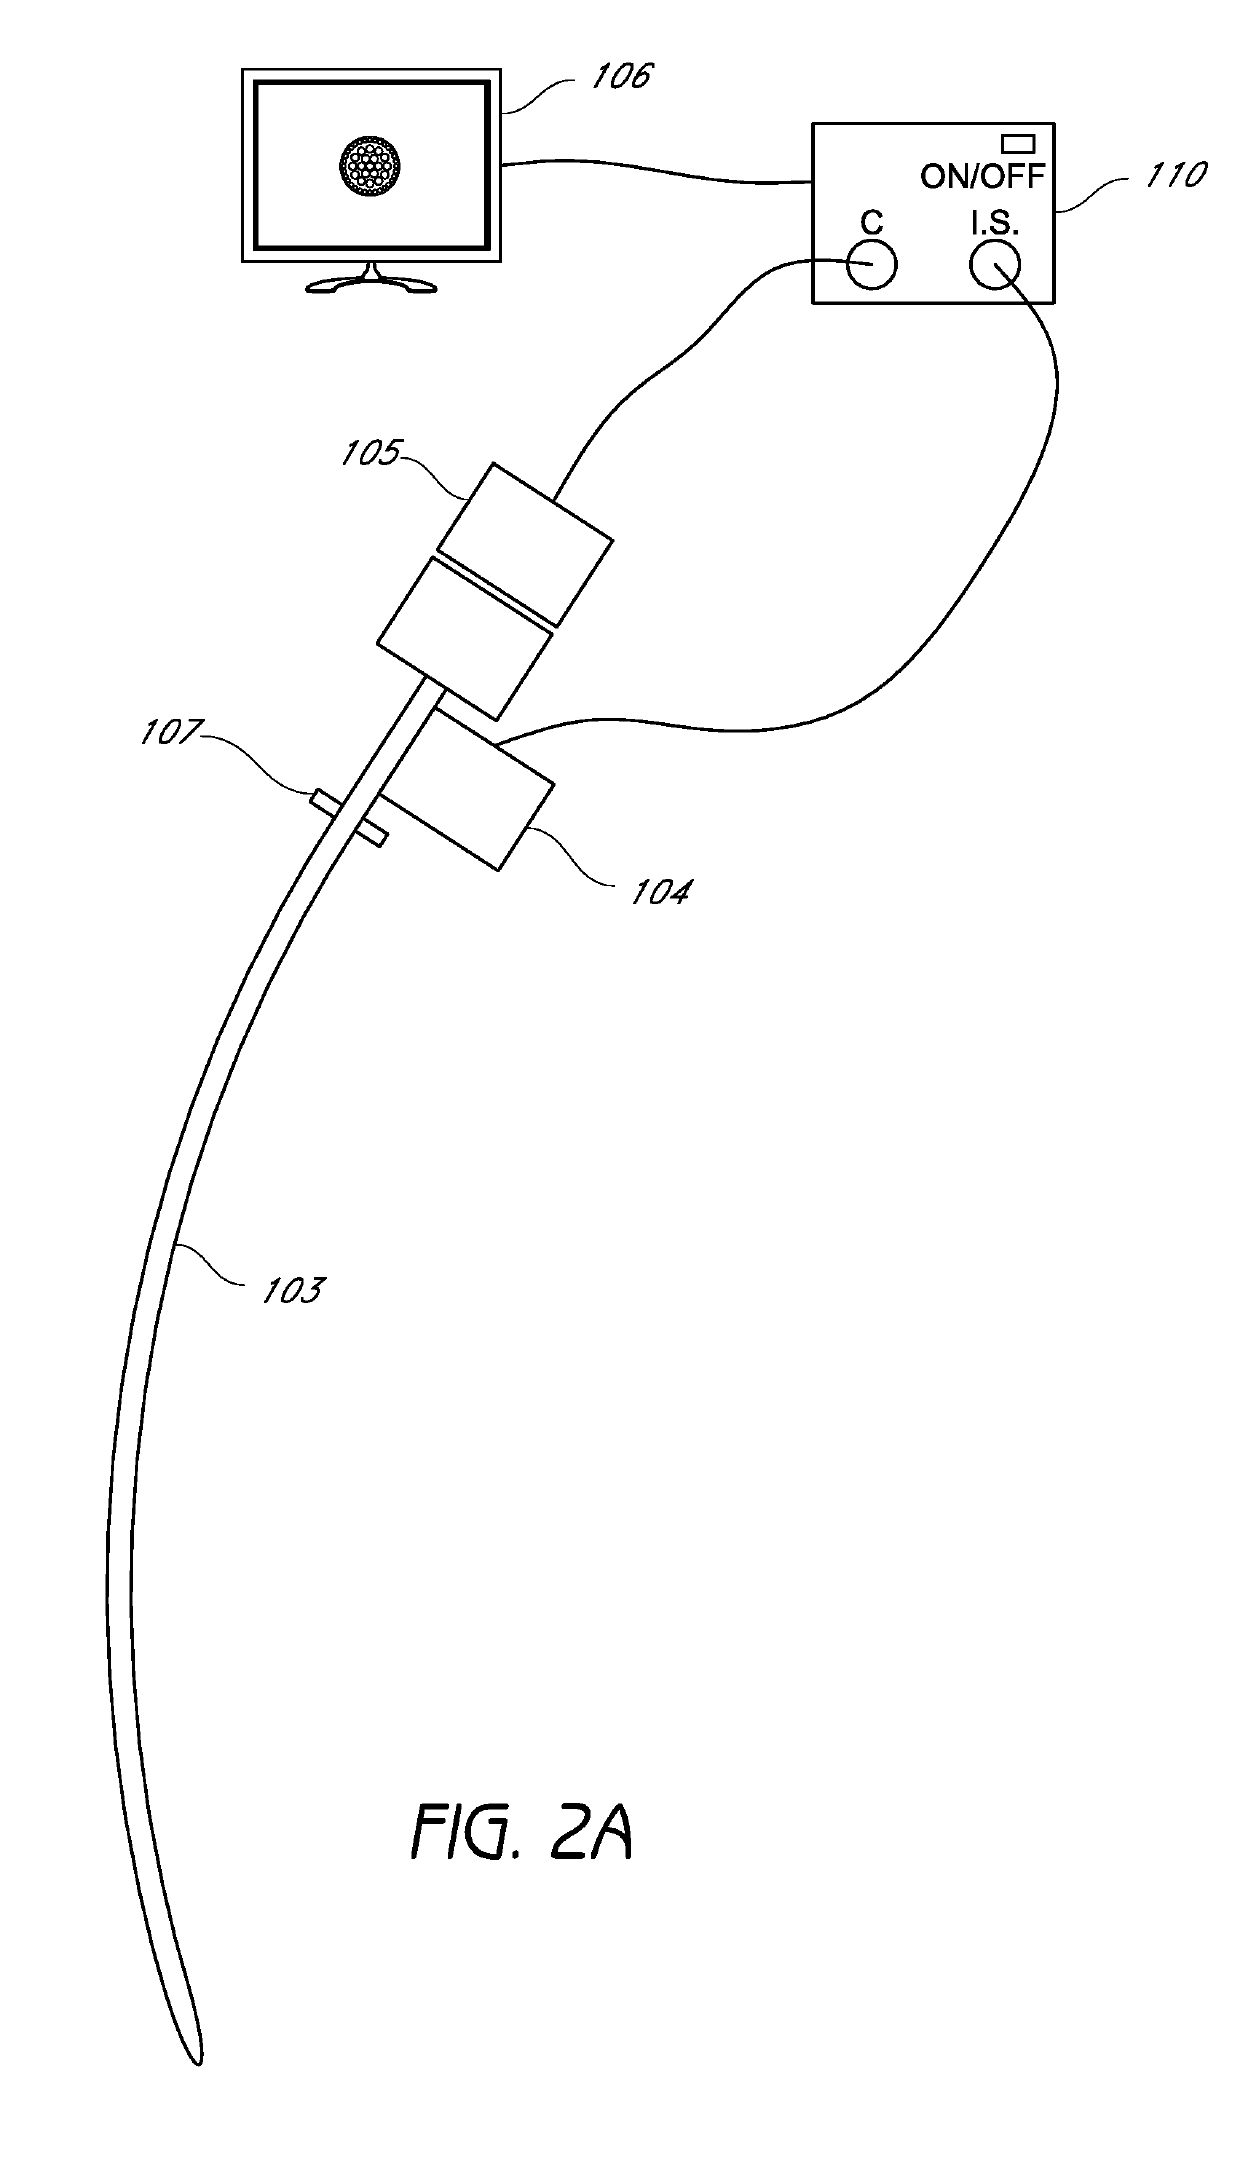 Closed suction cleaning devices, systems and methods